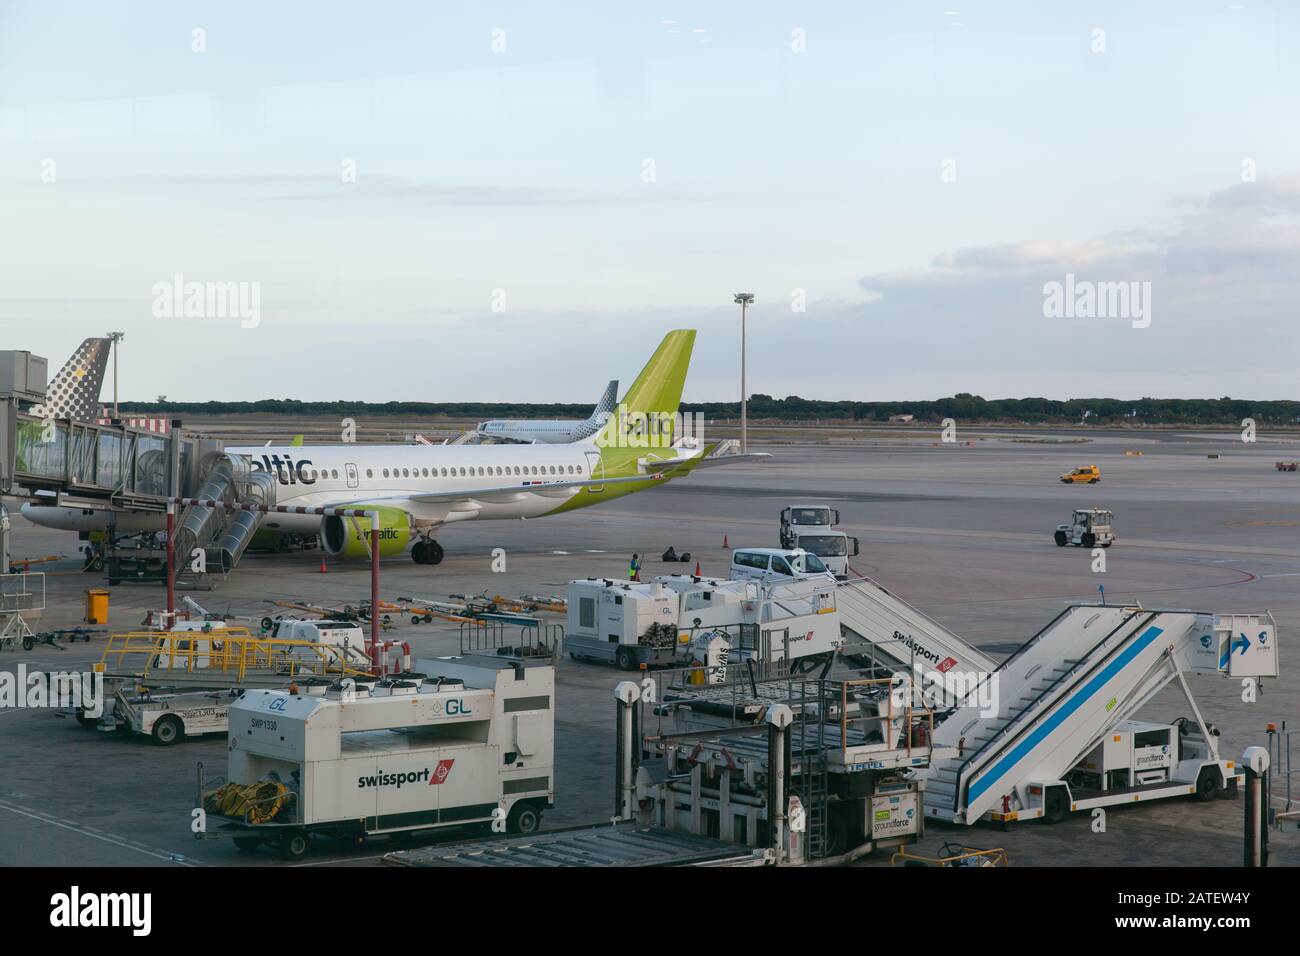 Barcelona, Spain - 29 December 2019: Airbaltic airplane being prepared for take off in Barcelona El Prat airport Stock Photo